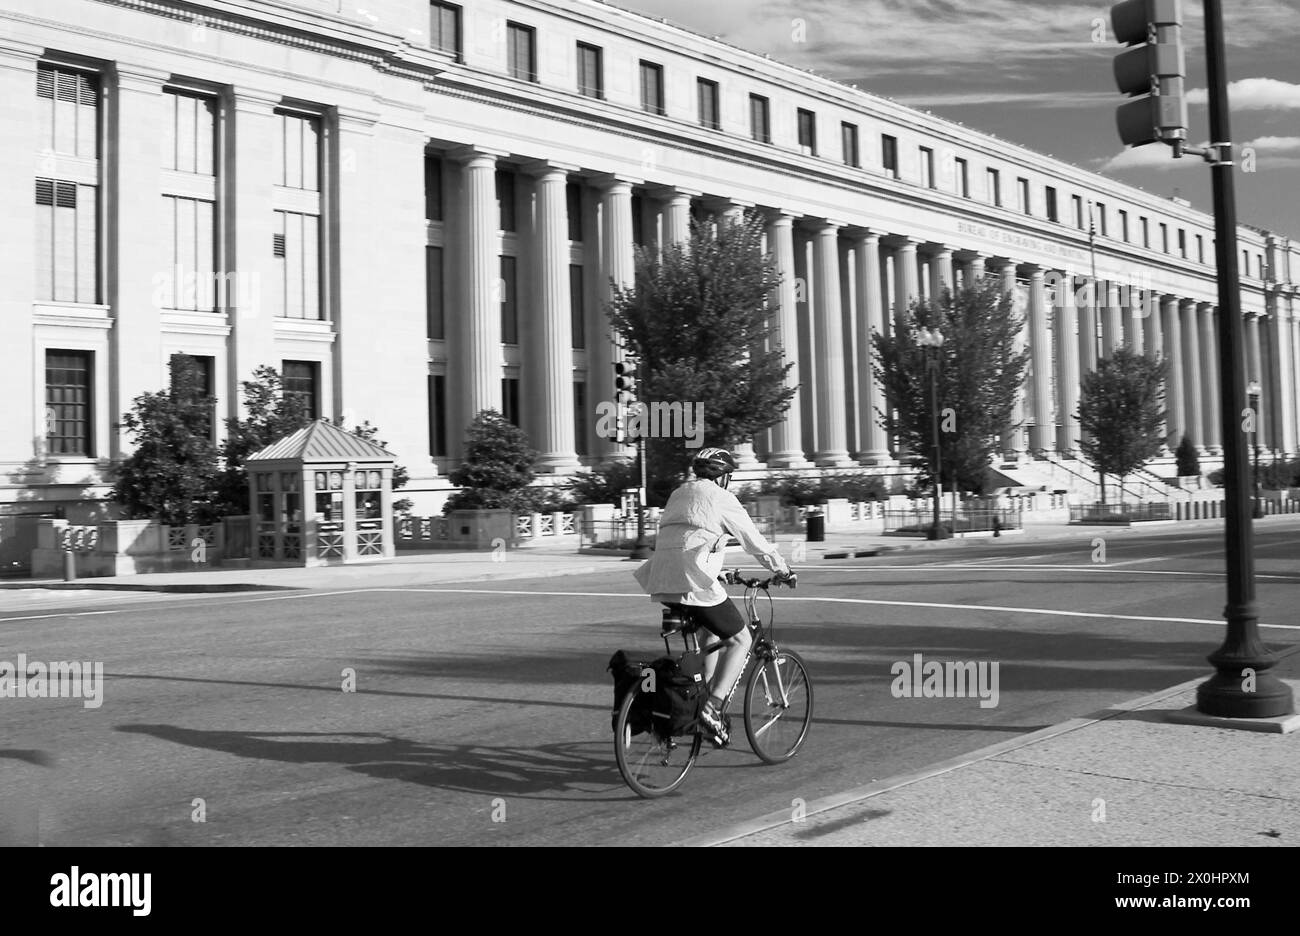 Biker riding in front of Washington DC Engraving building USA Stock Photo